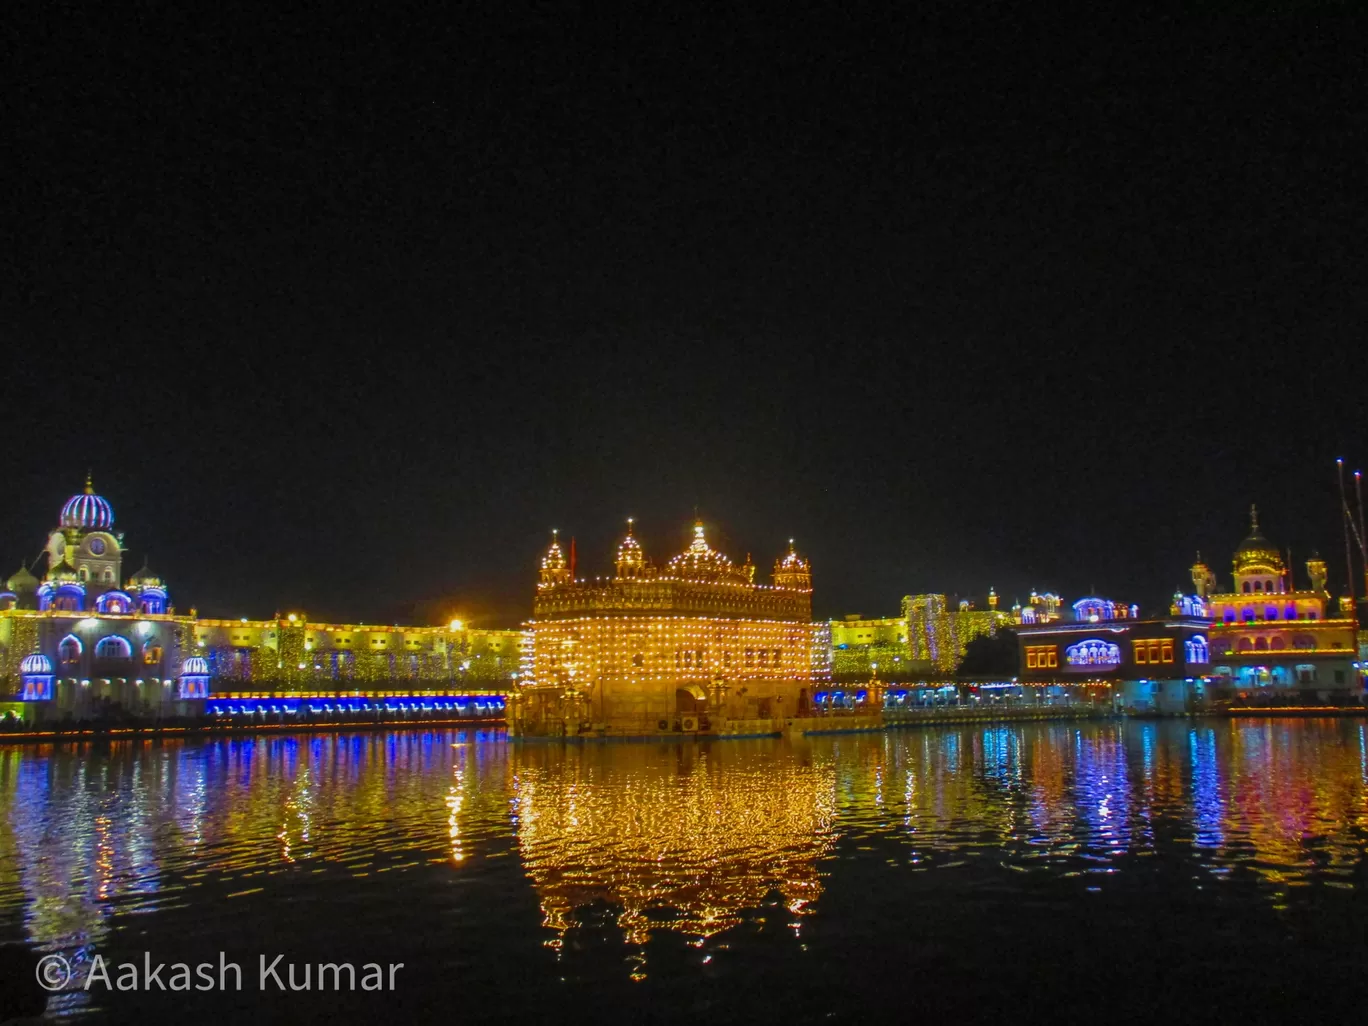 Photo of Golden Temple By Aakash Kumar